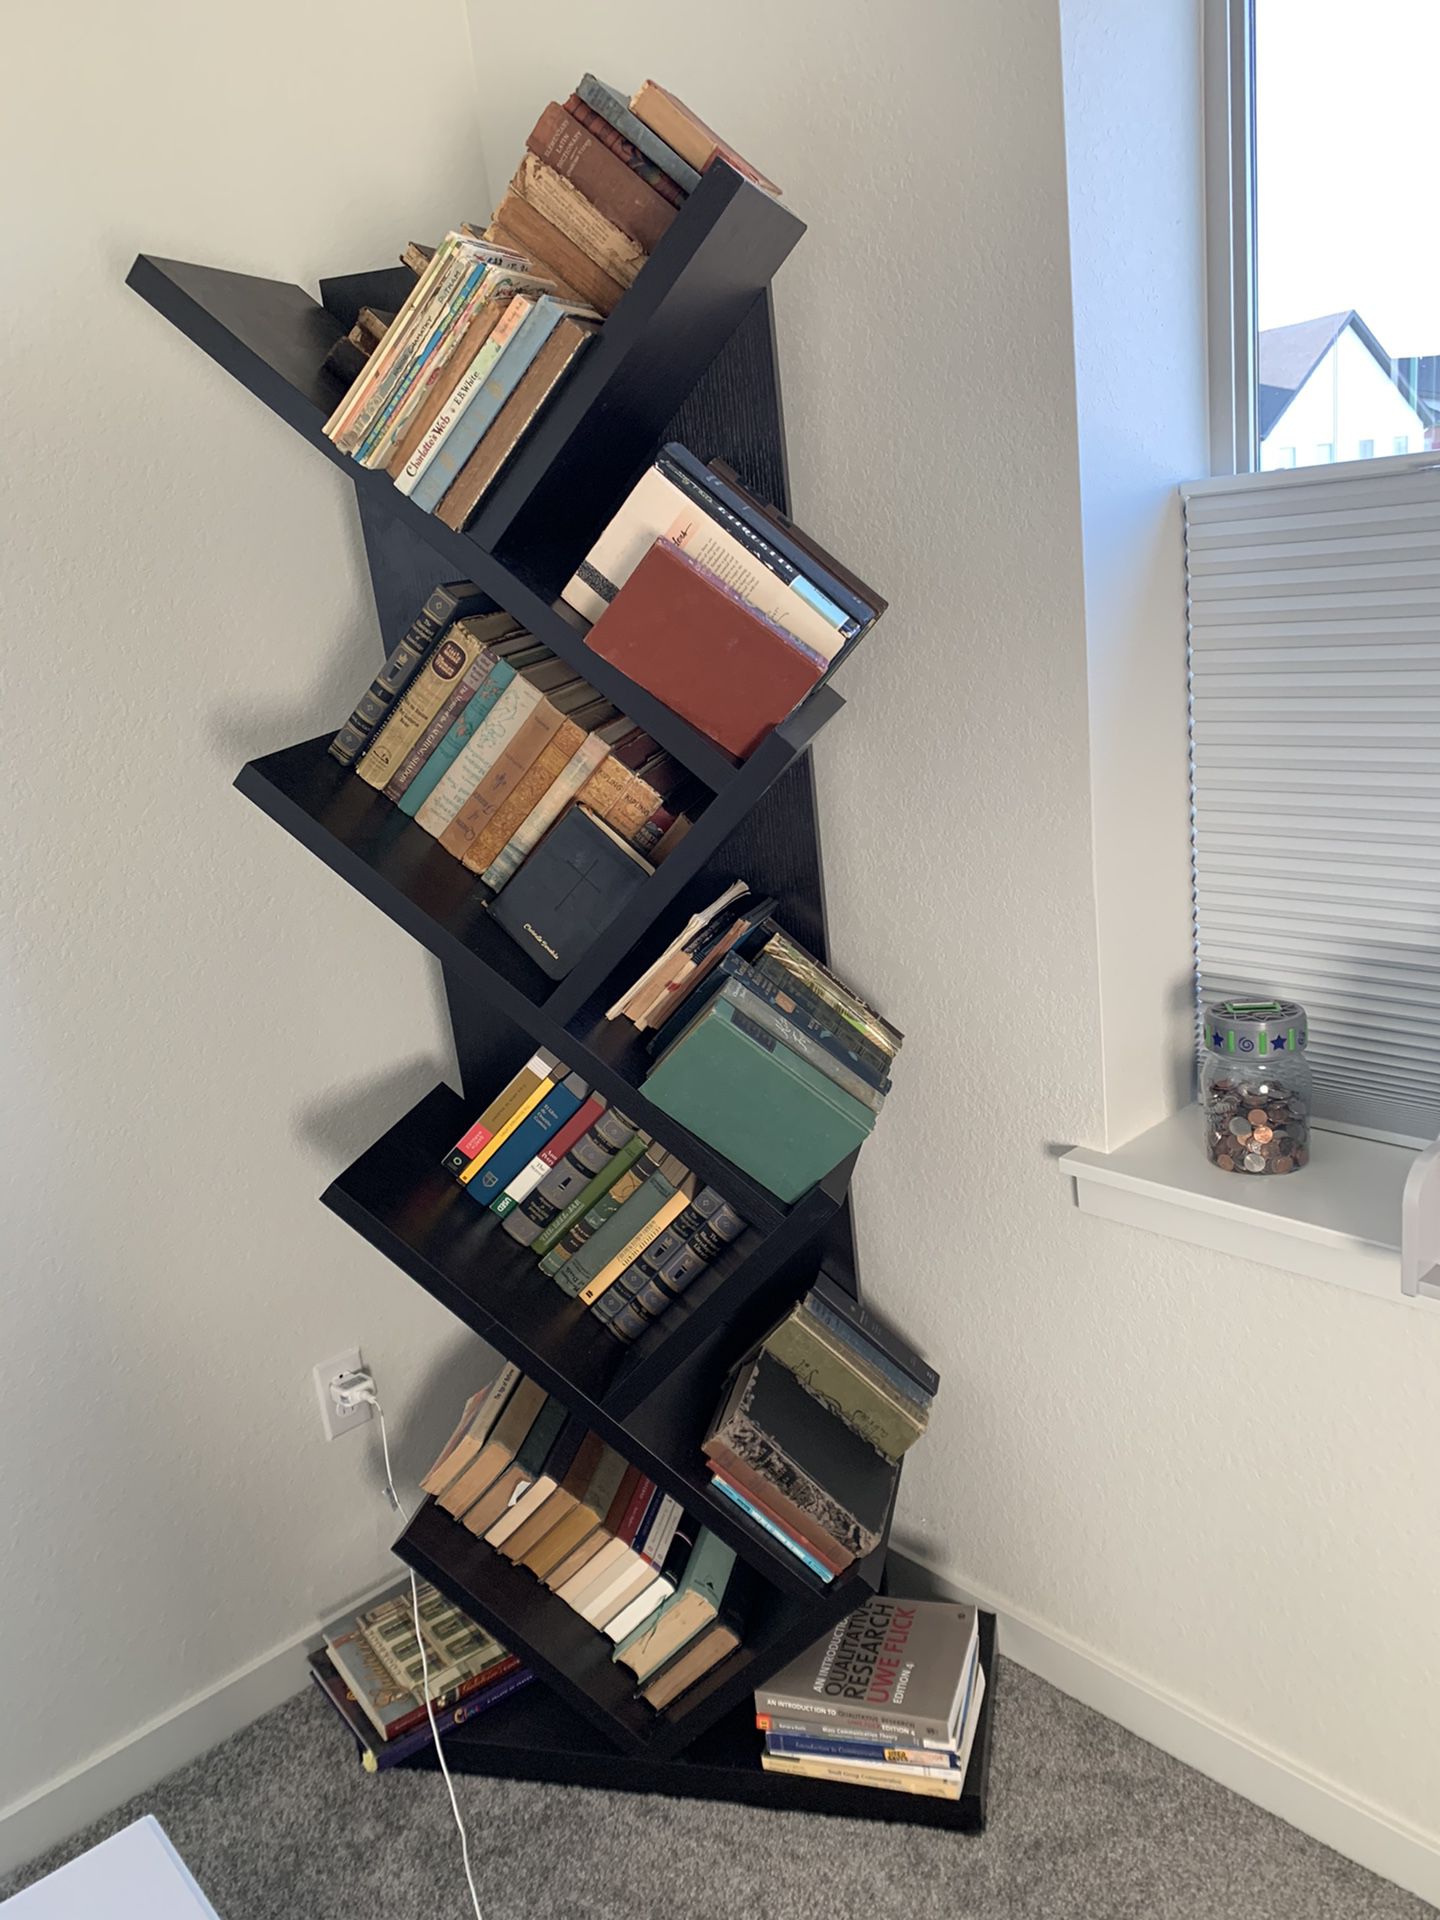 Tree bookshelves in great condition